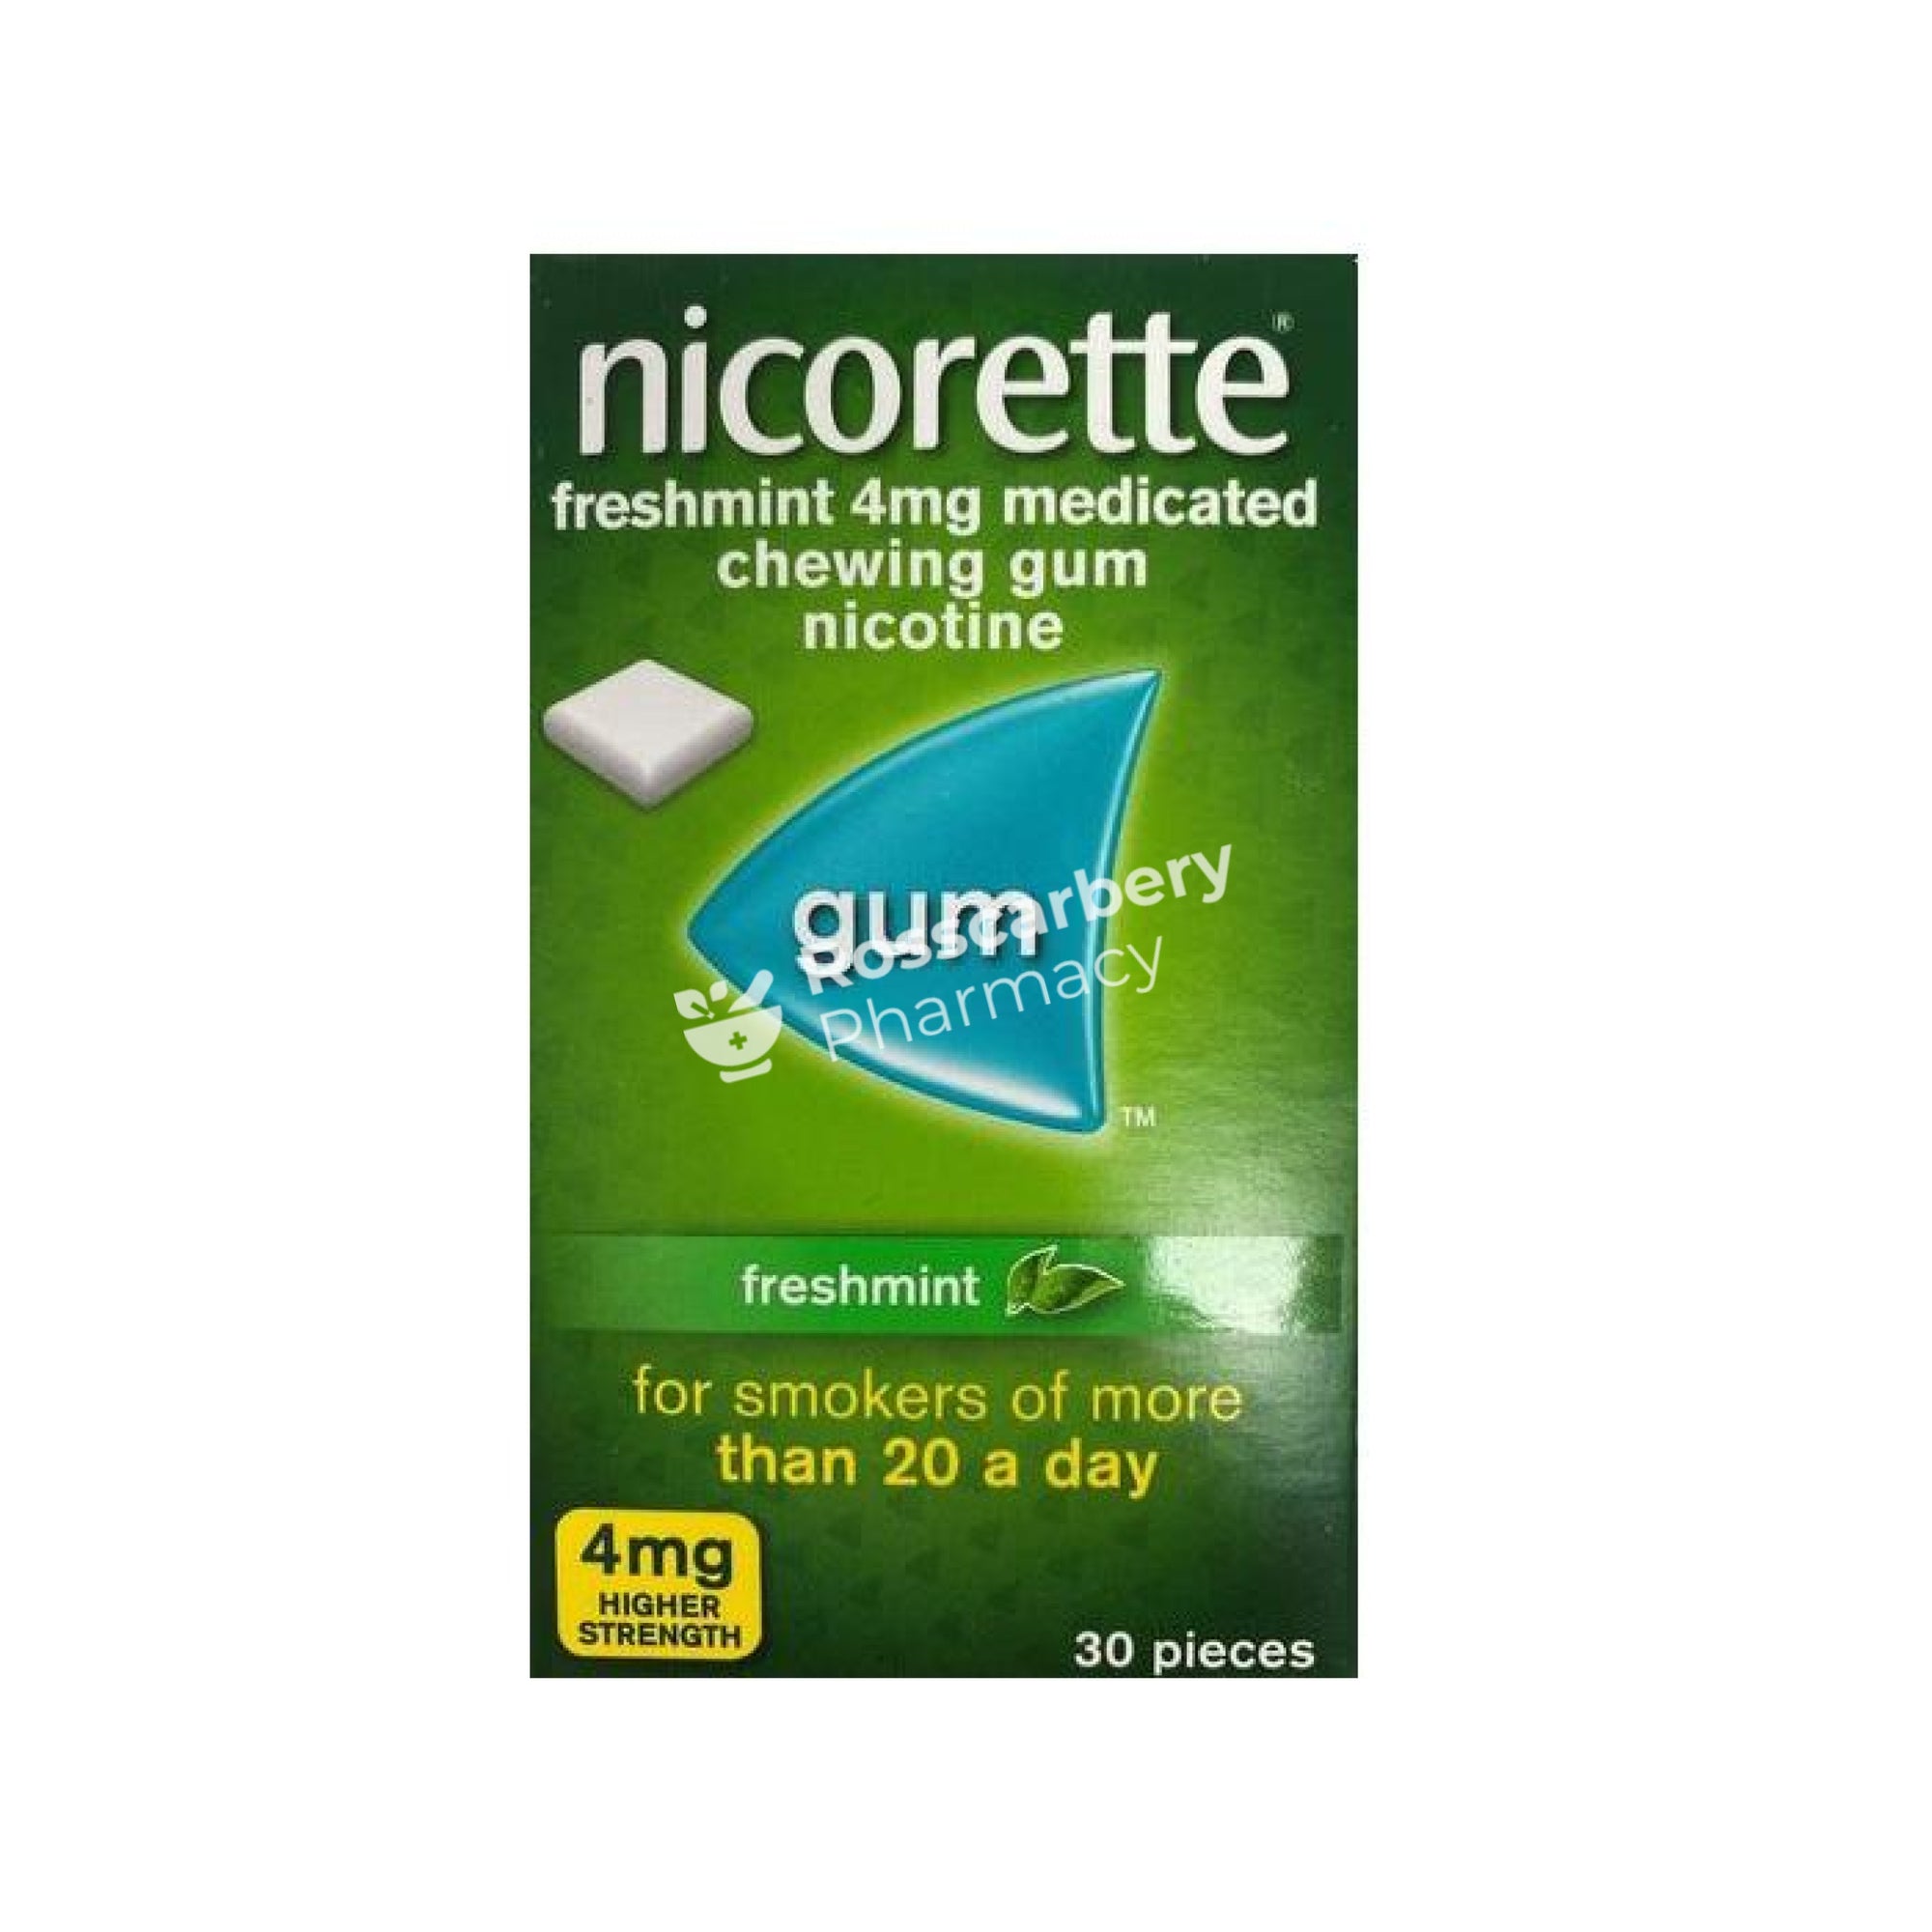 Nicorette 4Mg High Strength Medicated Chewing Gum 30Pieces / Freshmint Nicotine